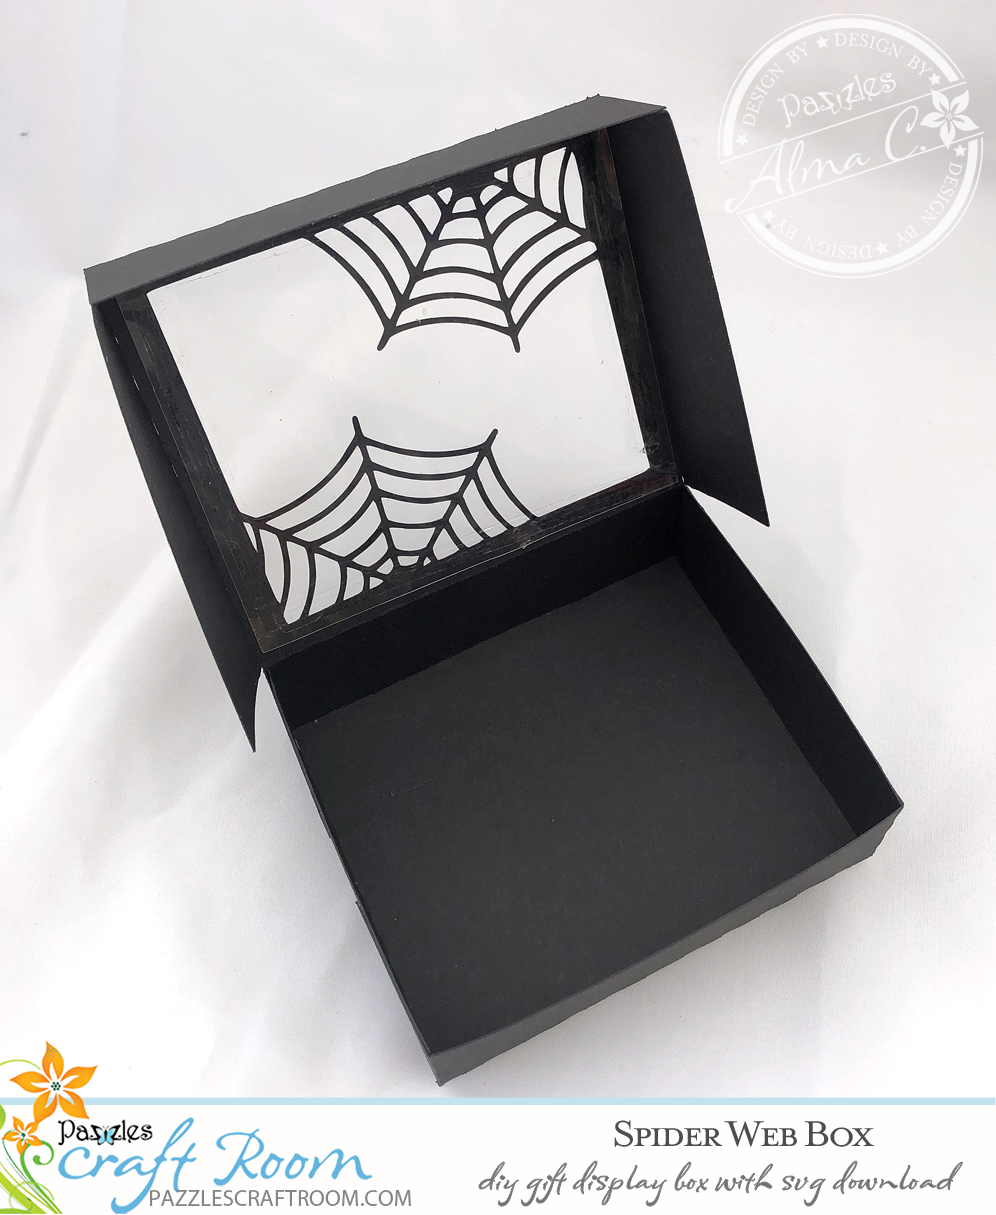 Pazzles DIY Spider Web Box for cookies or gifts. SVG instant download included. Compatible with all major electronic cutters including Pazzles Inspiration, Cricut, and Silhouette Cameo. Design by Alma Cervantes.